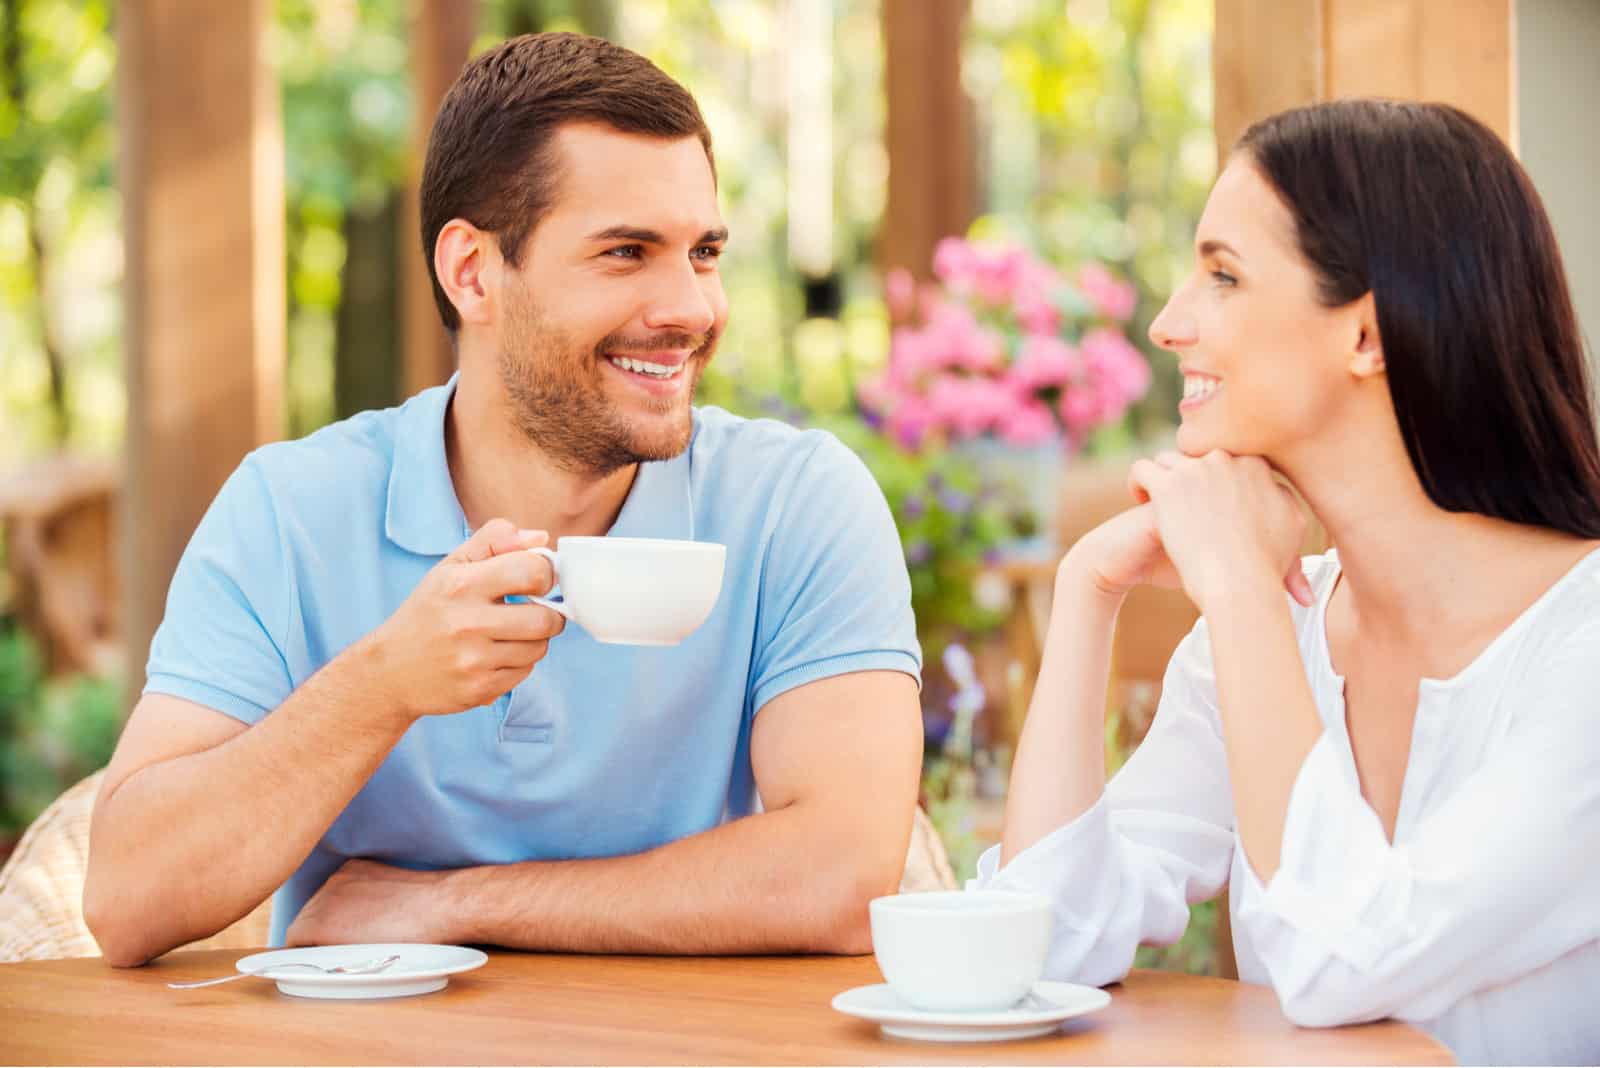 a smiling man and woman sit at a table and drink coffee